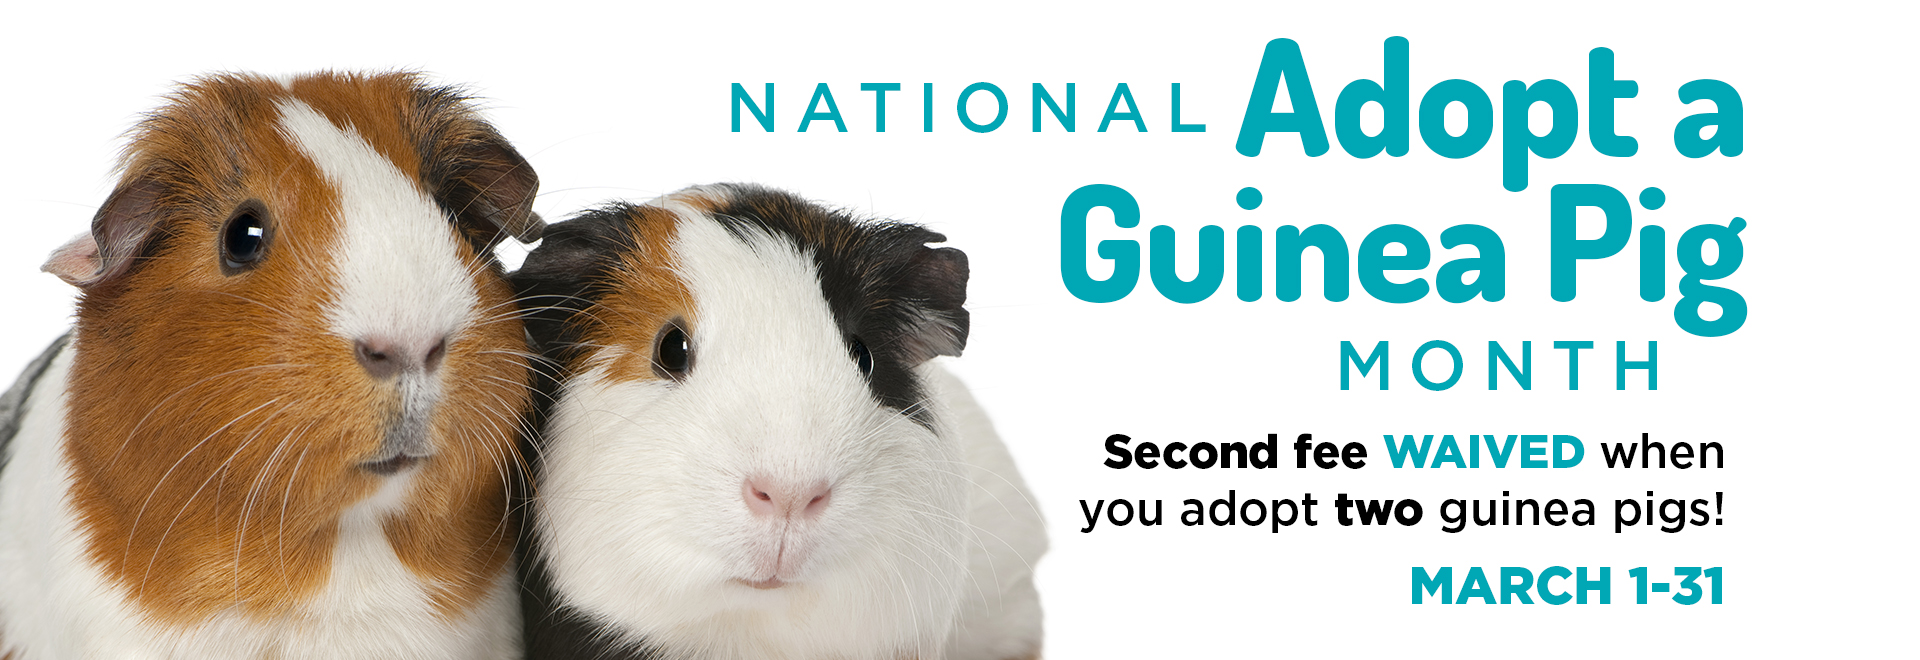 National Adopt a Guinea Pig Month | Second fee waived when you adopt two guinea pigs! | March 1-31